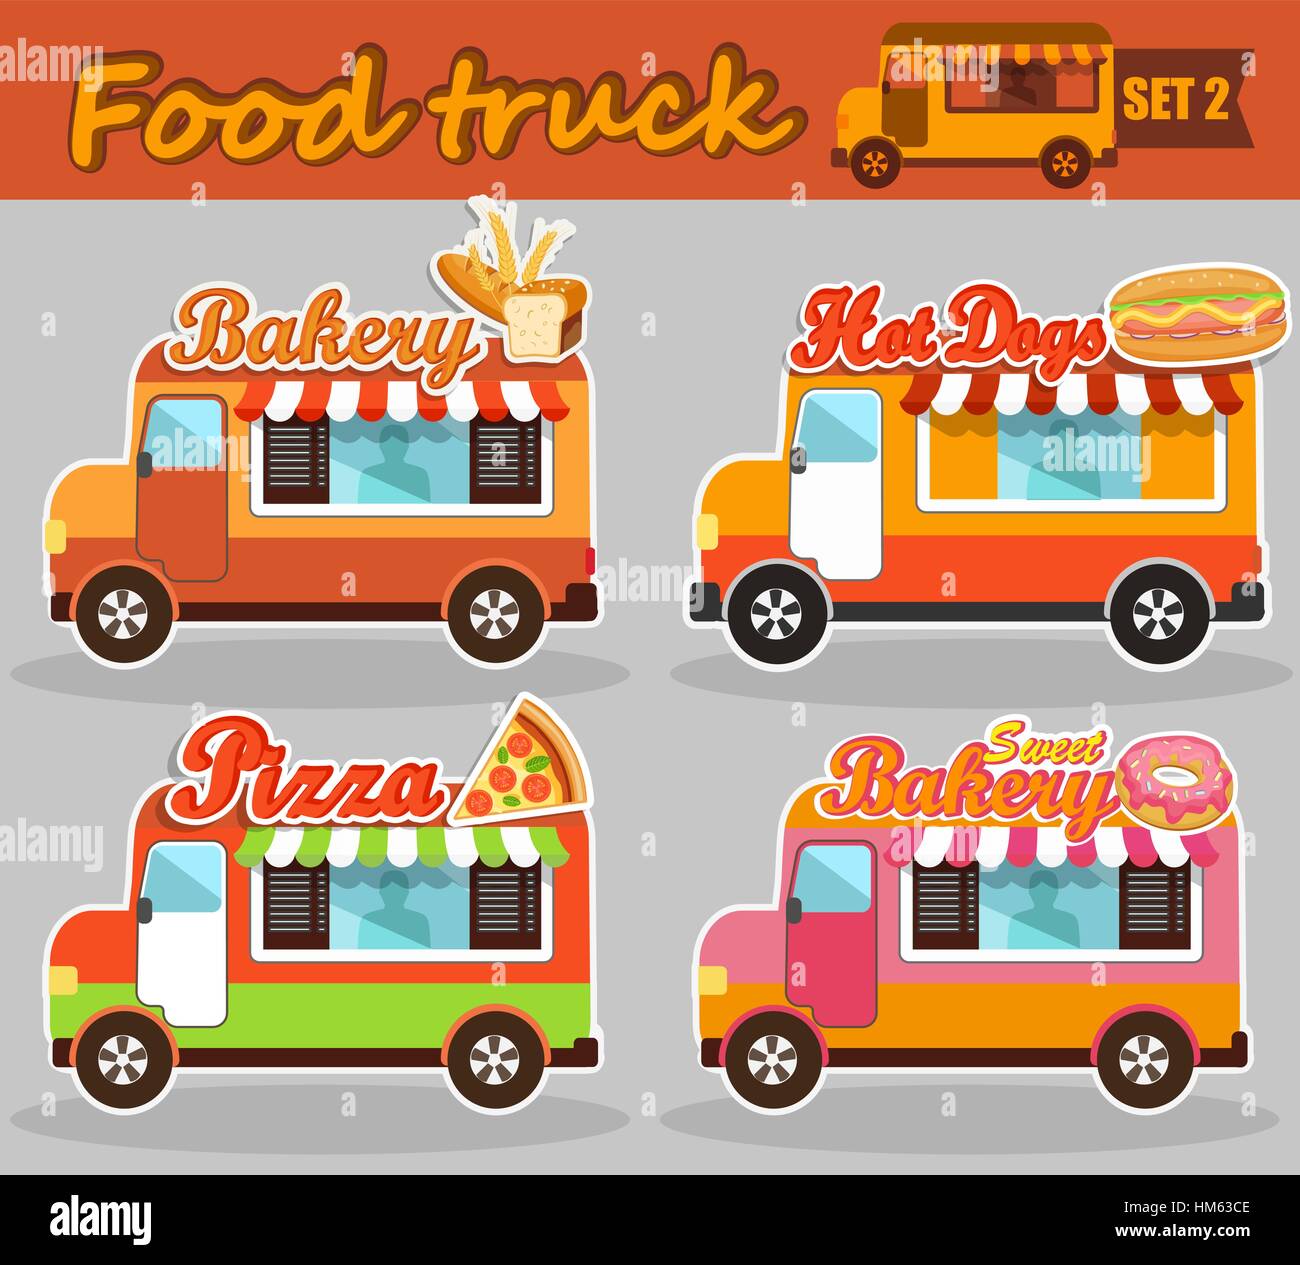 Set of vector illustrations food truck - bakery, pizza, hot dog and sweet bakery. Stock Vector